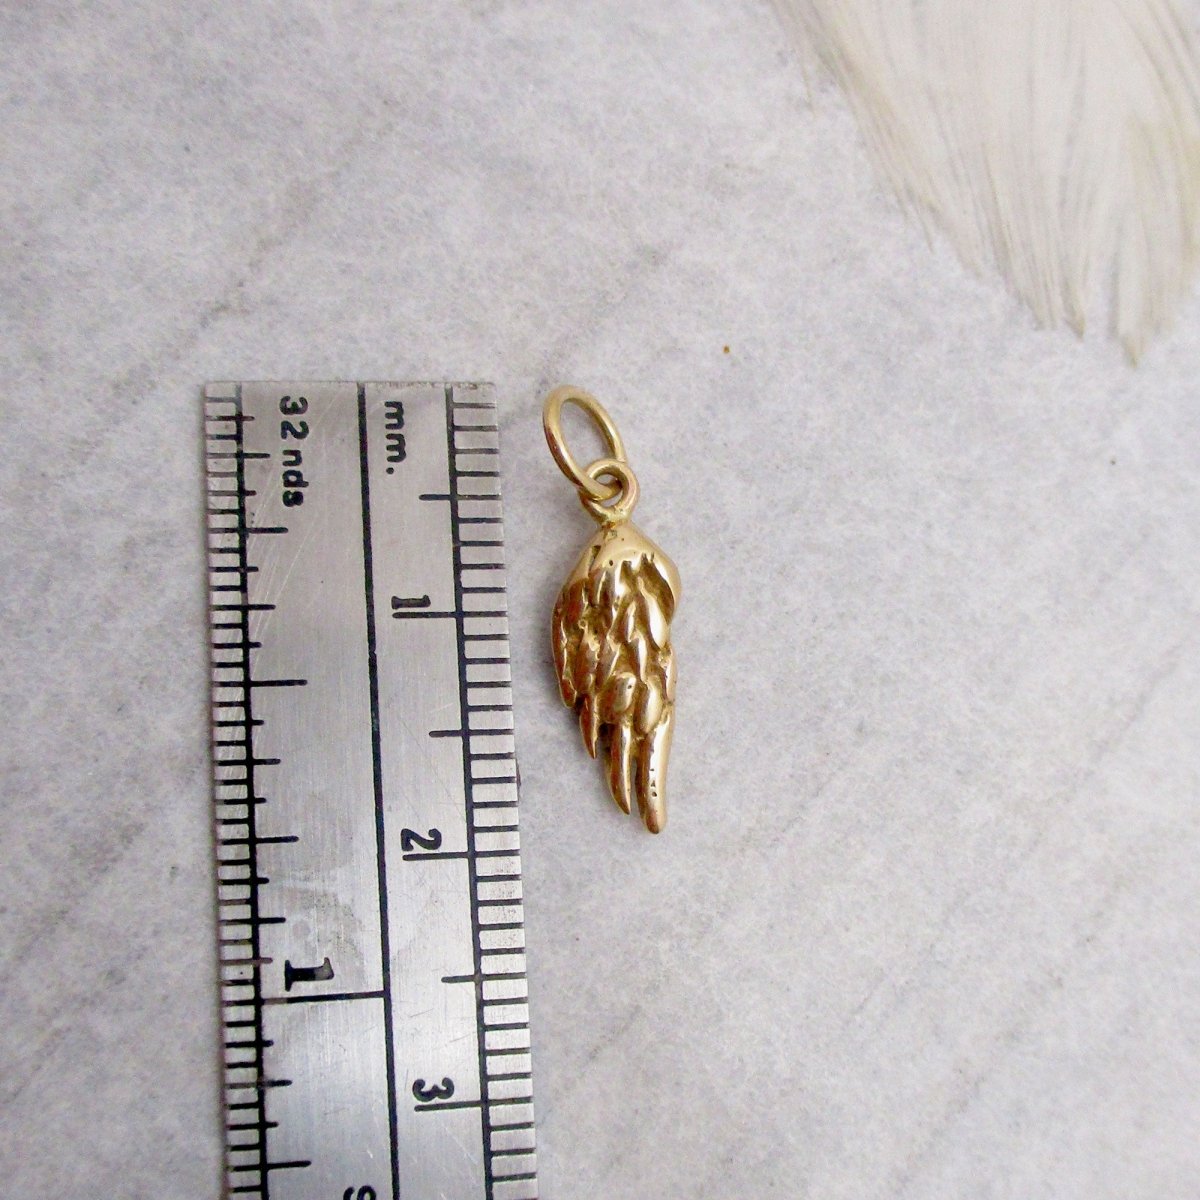 Feathered Angel Wing Charm in Solid 14 Karat Yellow Gold, Guidance and Protection Charm - Luxe Design Jewellery